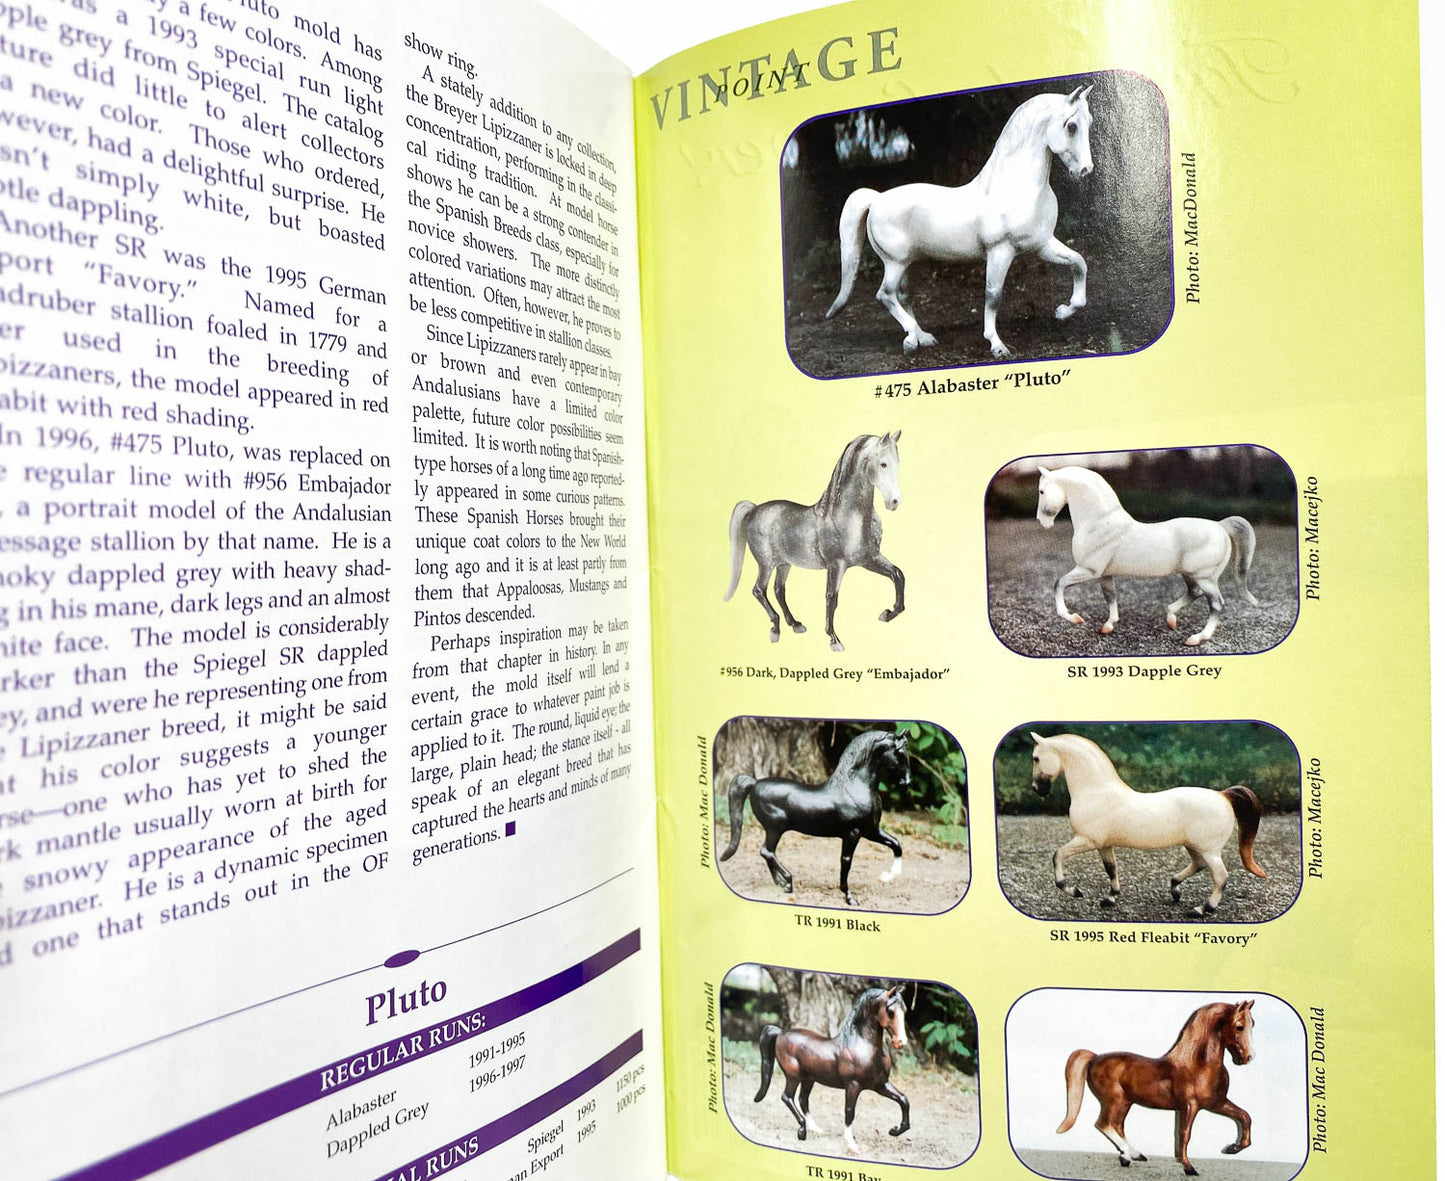 Just About Horses Magazine Vol. 26, No. 4, 1999 July/Aug